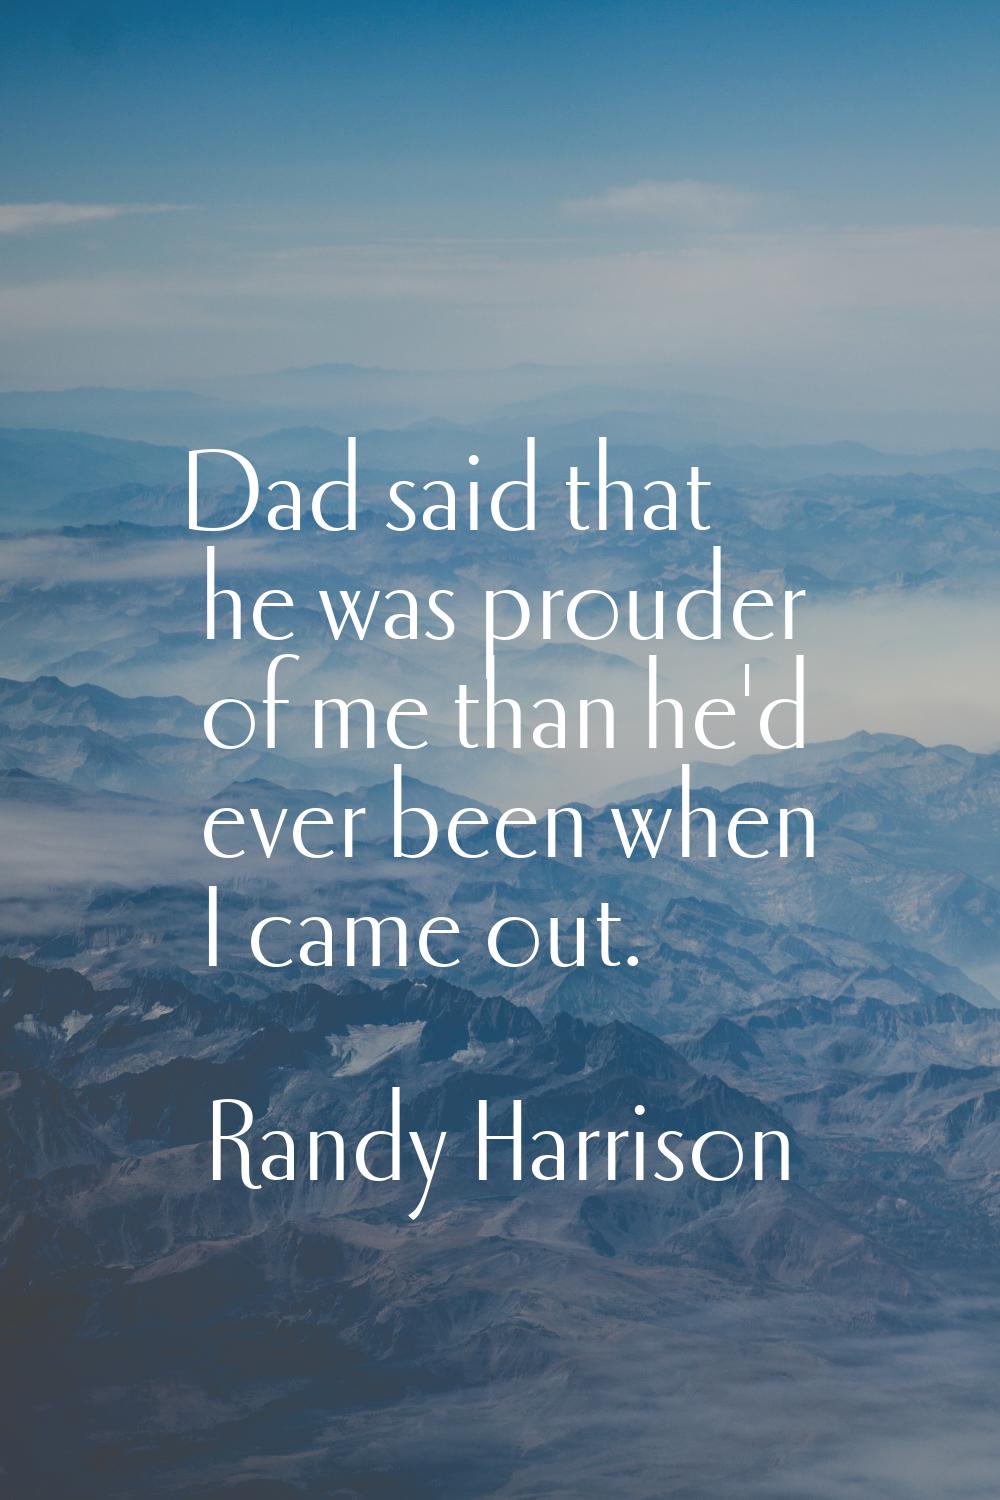 Dad said that he was prouder of me than he'd ever been when I came out.